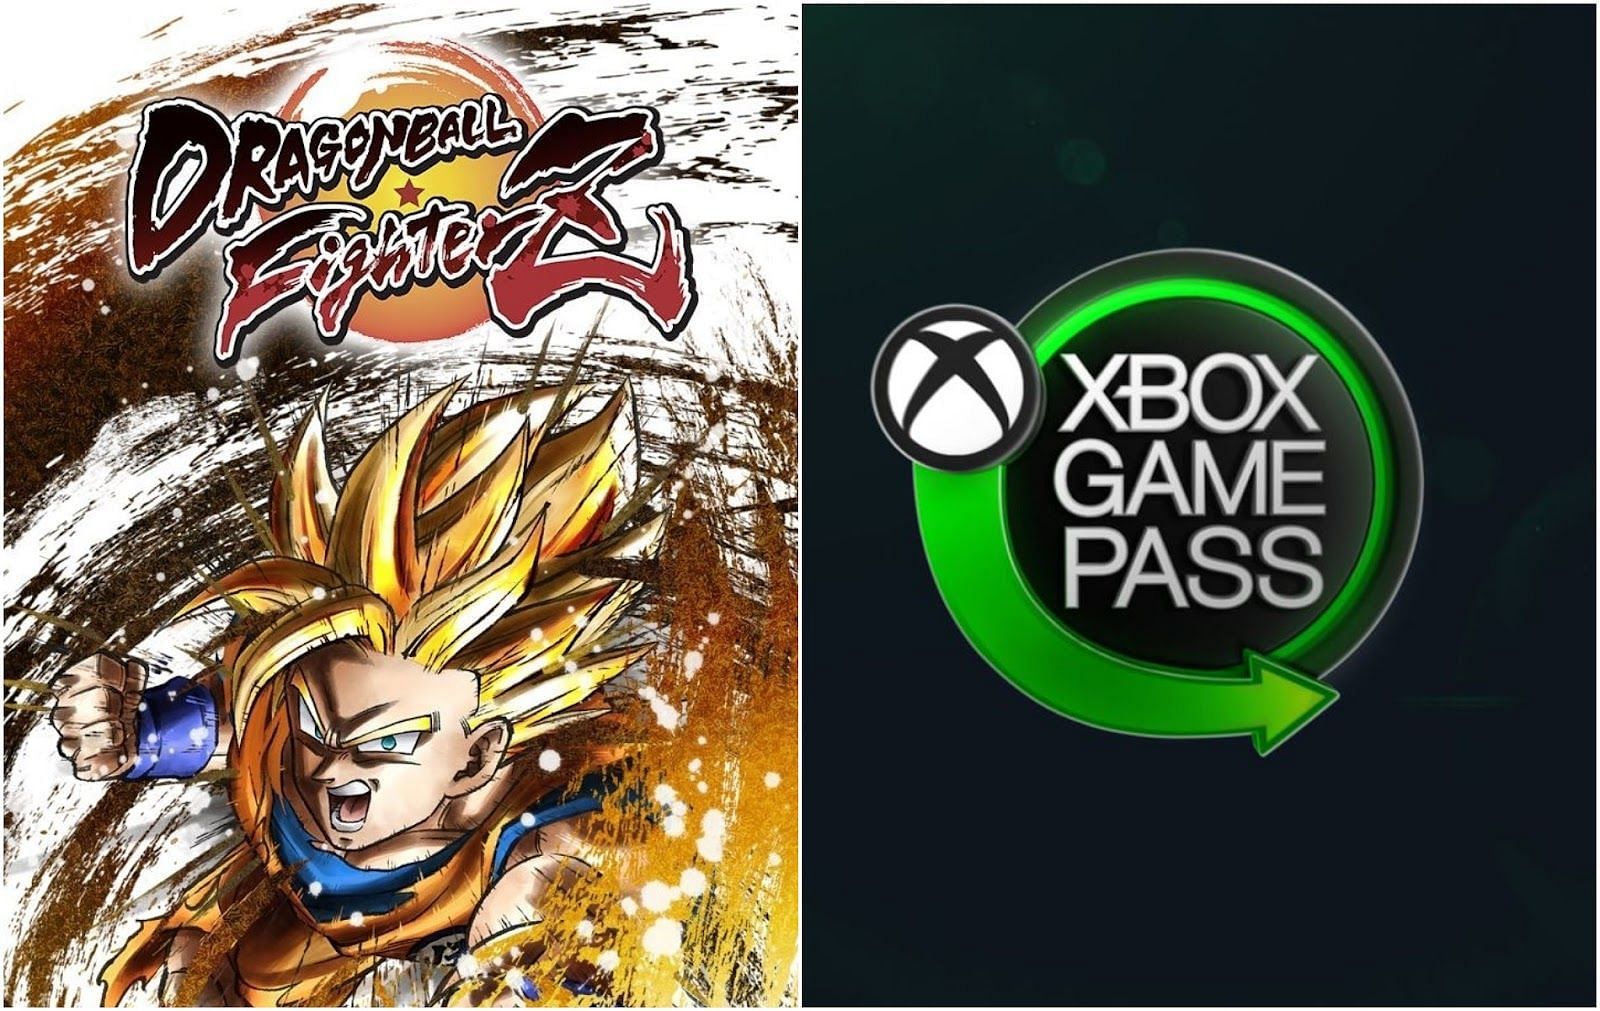 Dragon Ball Fighter Z is coming to PC Game Pass (Image by Bandai Namco, Xbox)